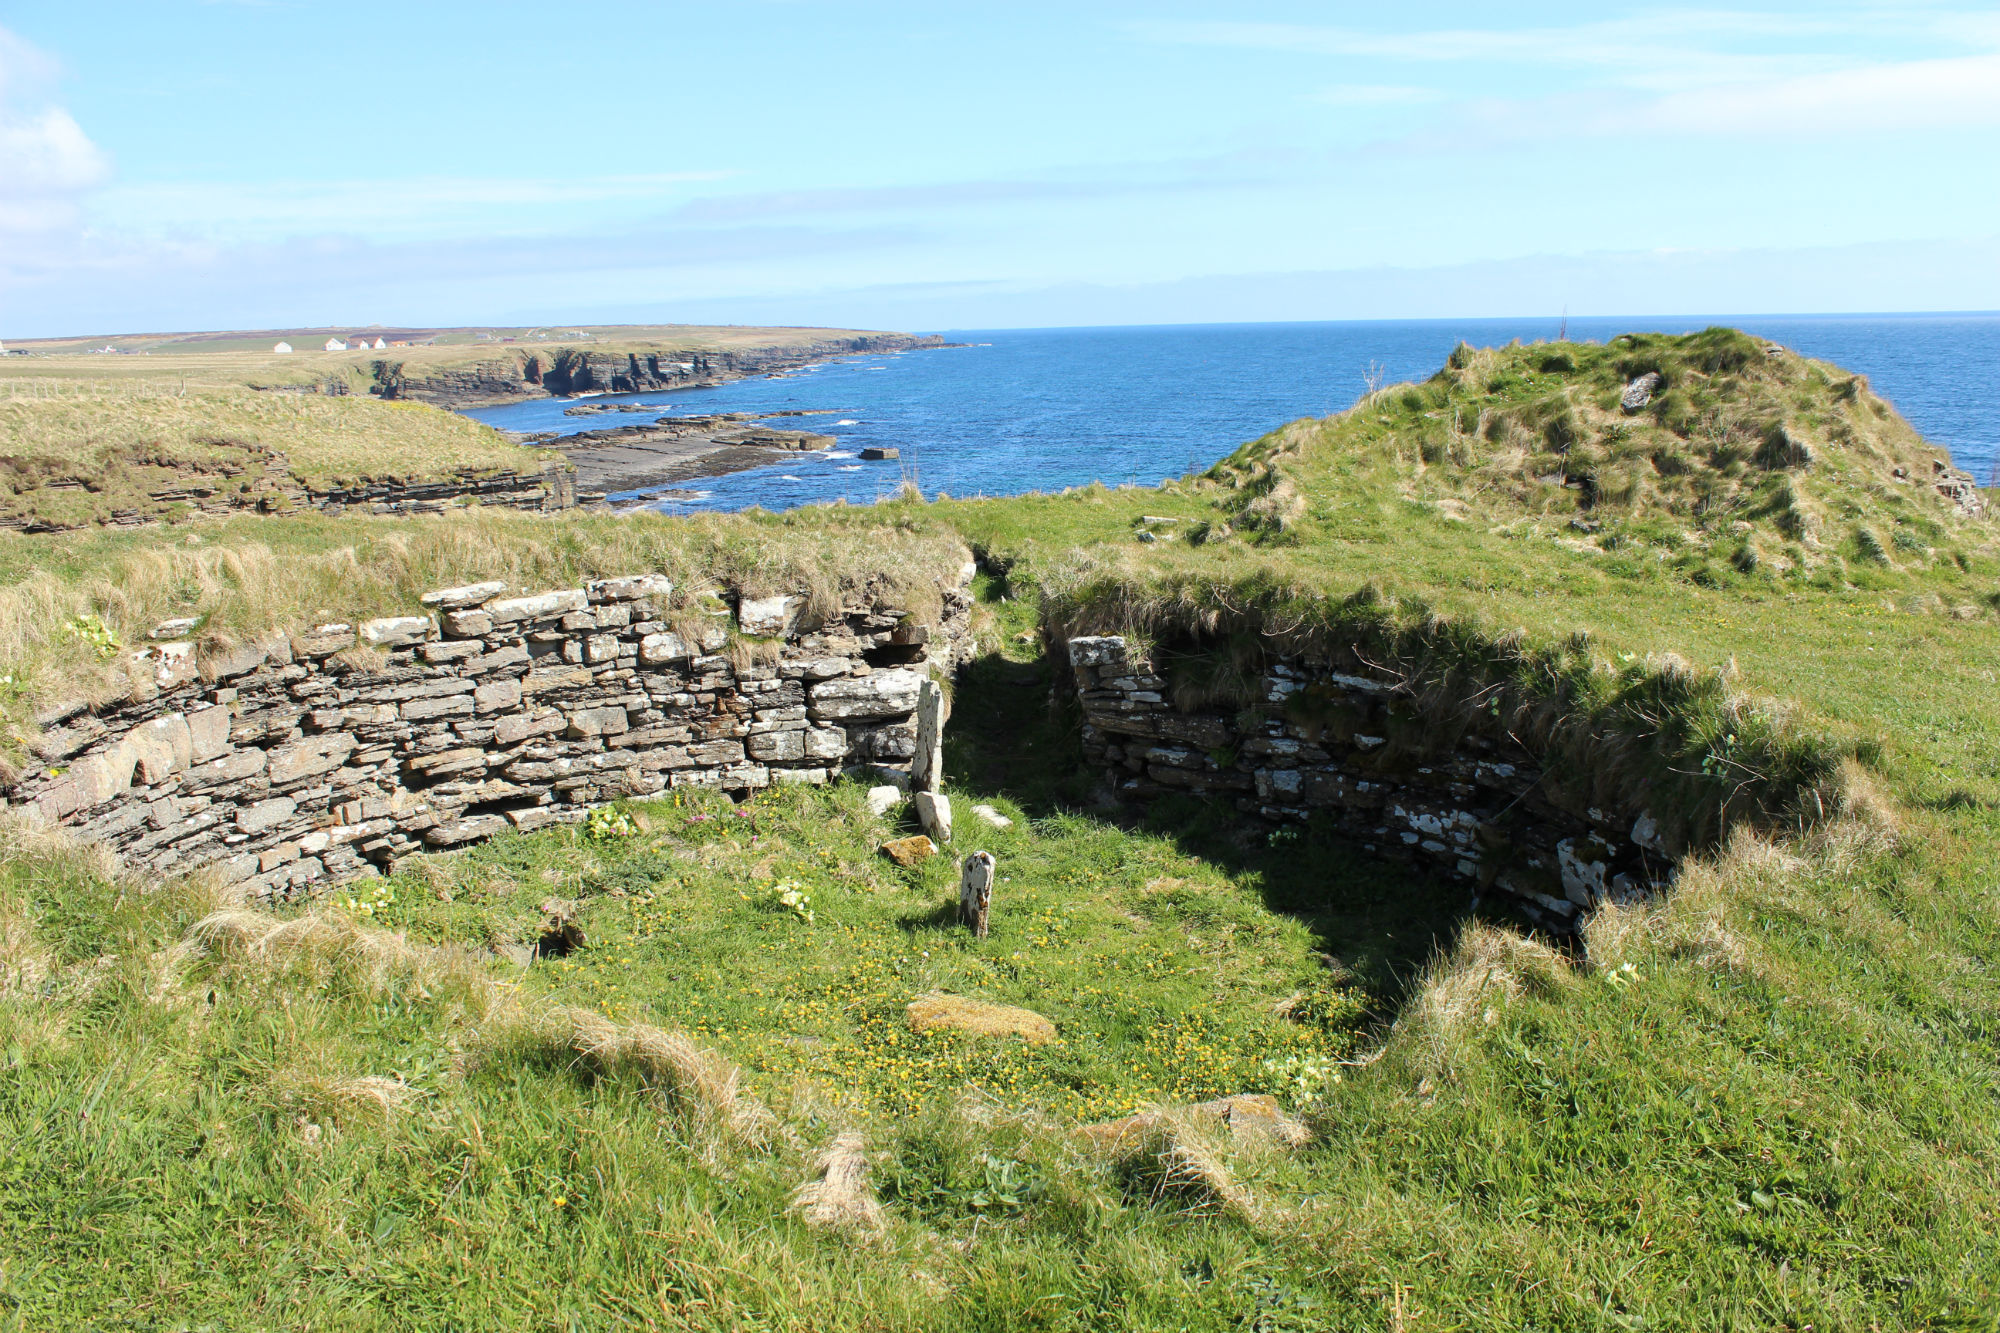 Interior of broch with excavation spoil tip